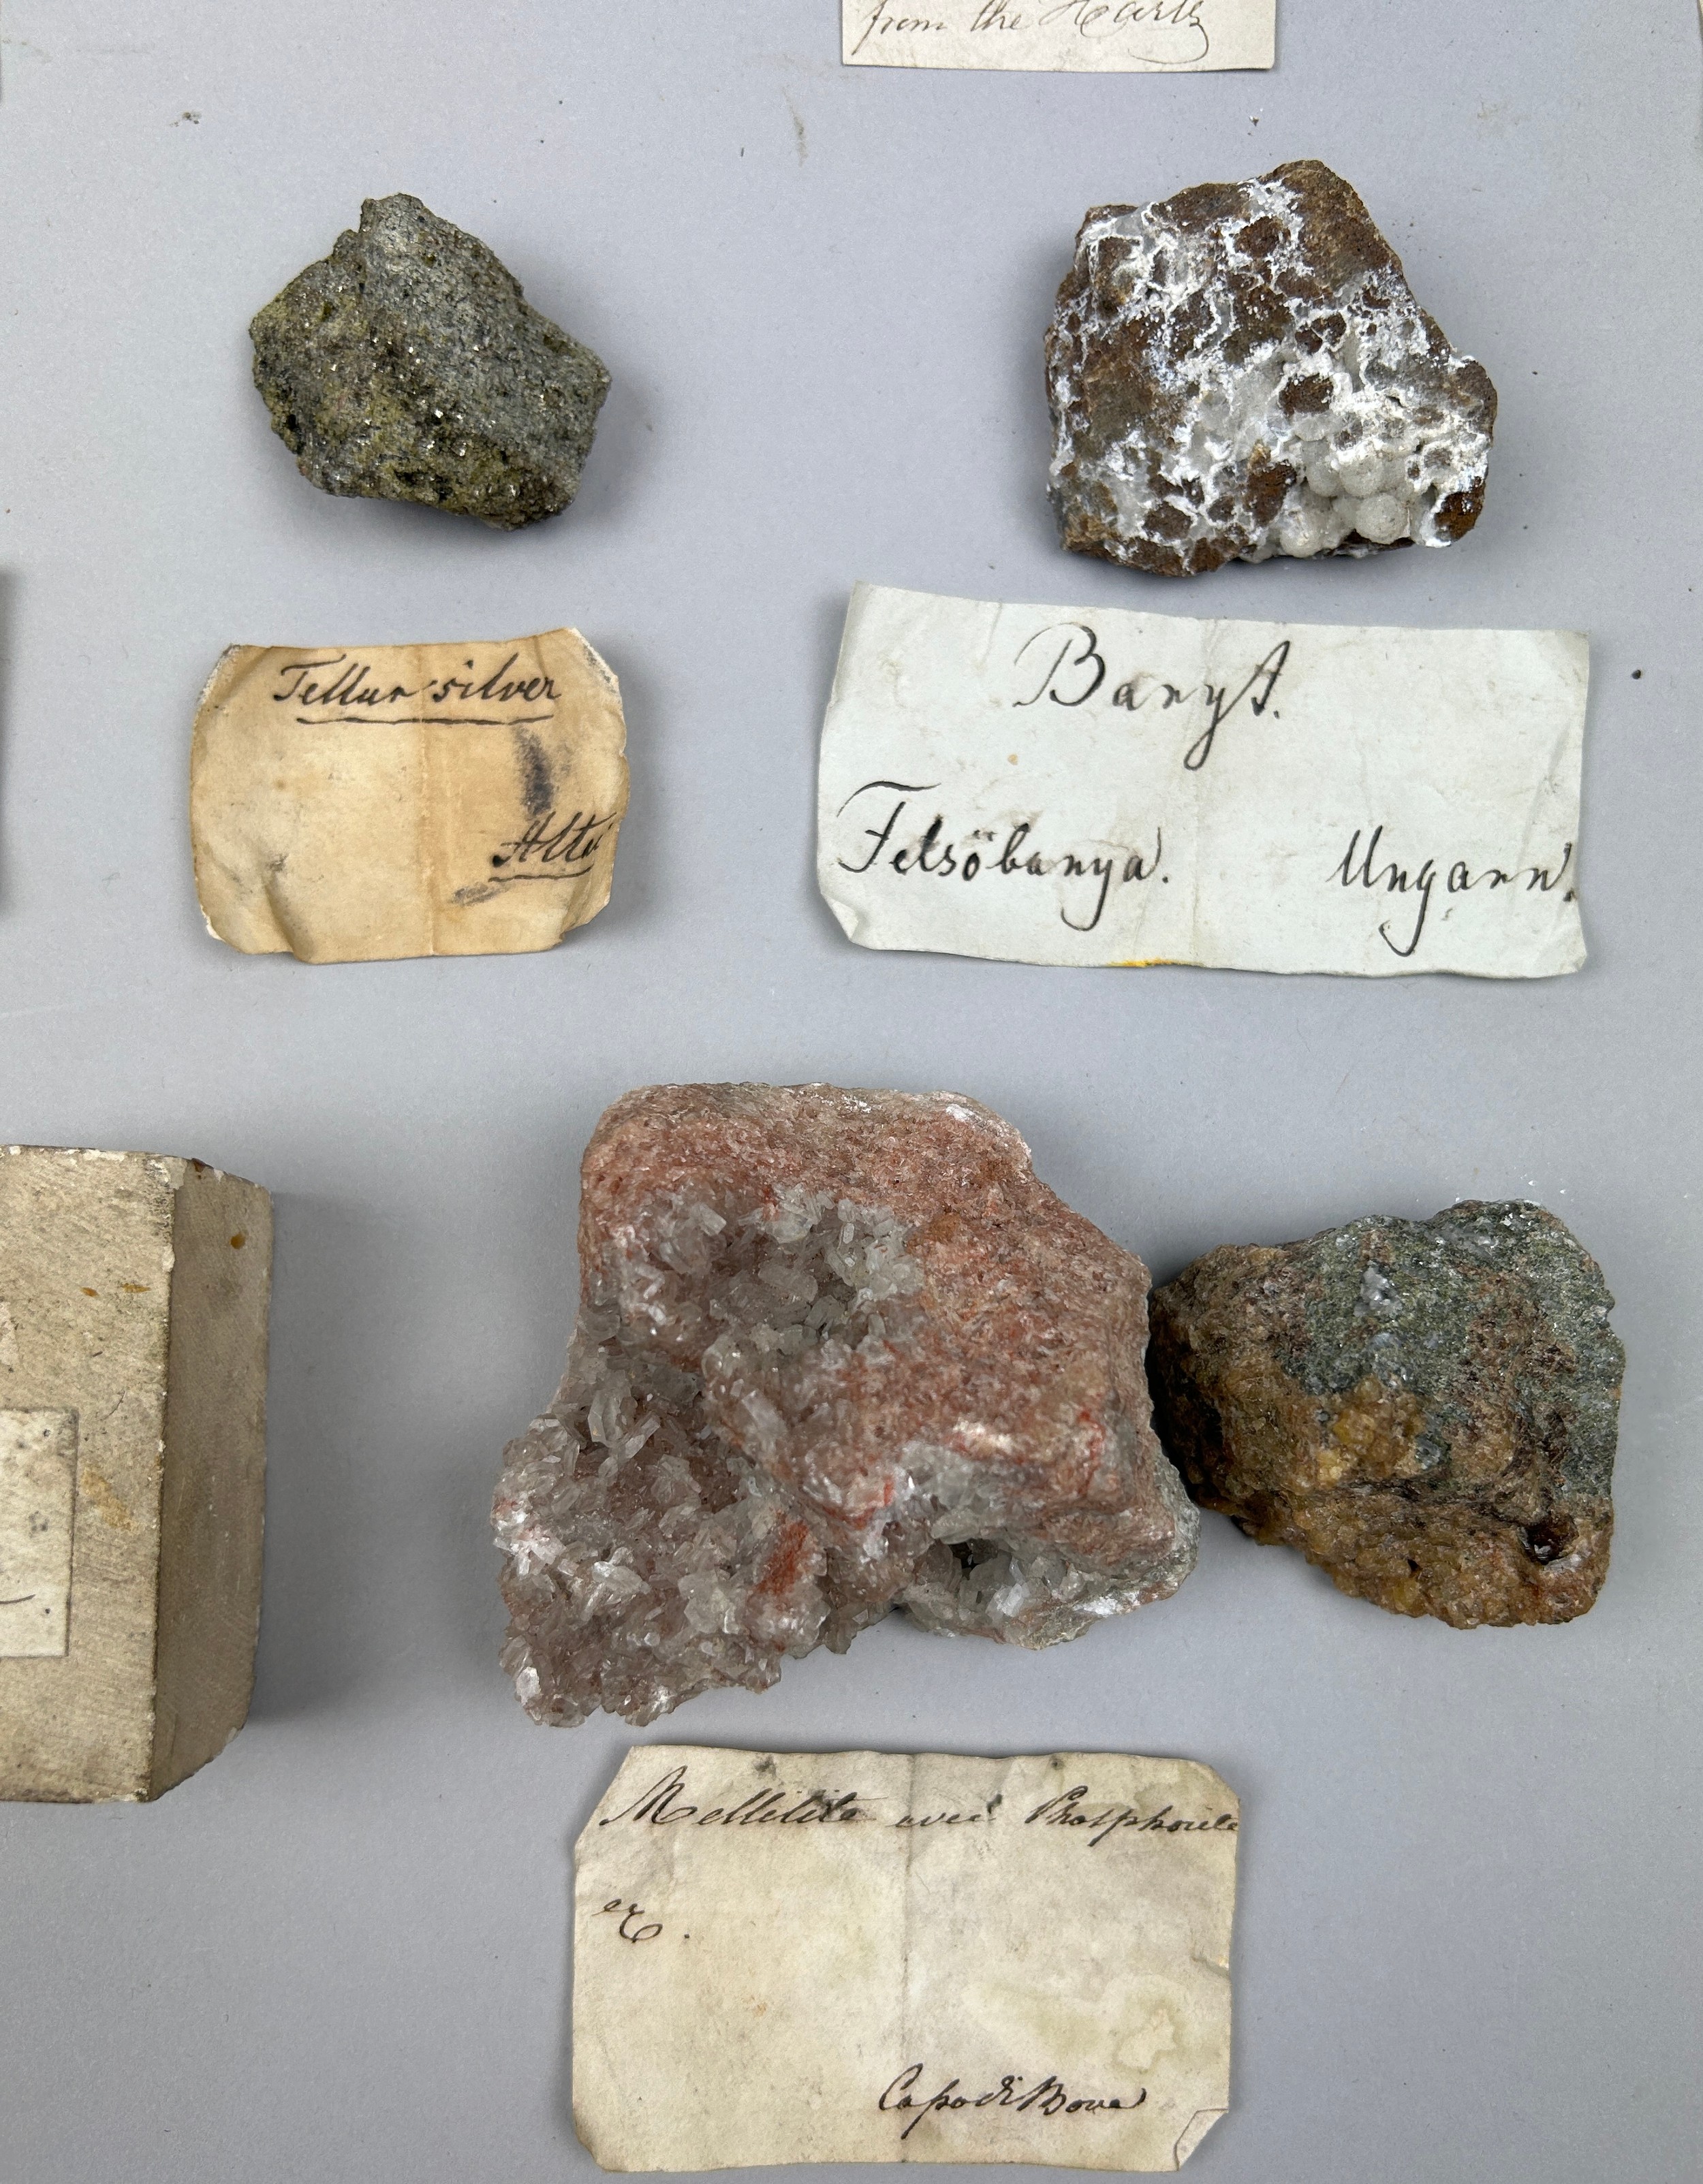 A RARE CABINET COLLECTION OF MINERALS CIRCA 1810-1860, including minerals probably collected by - Image 4 of 33